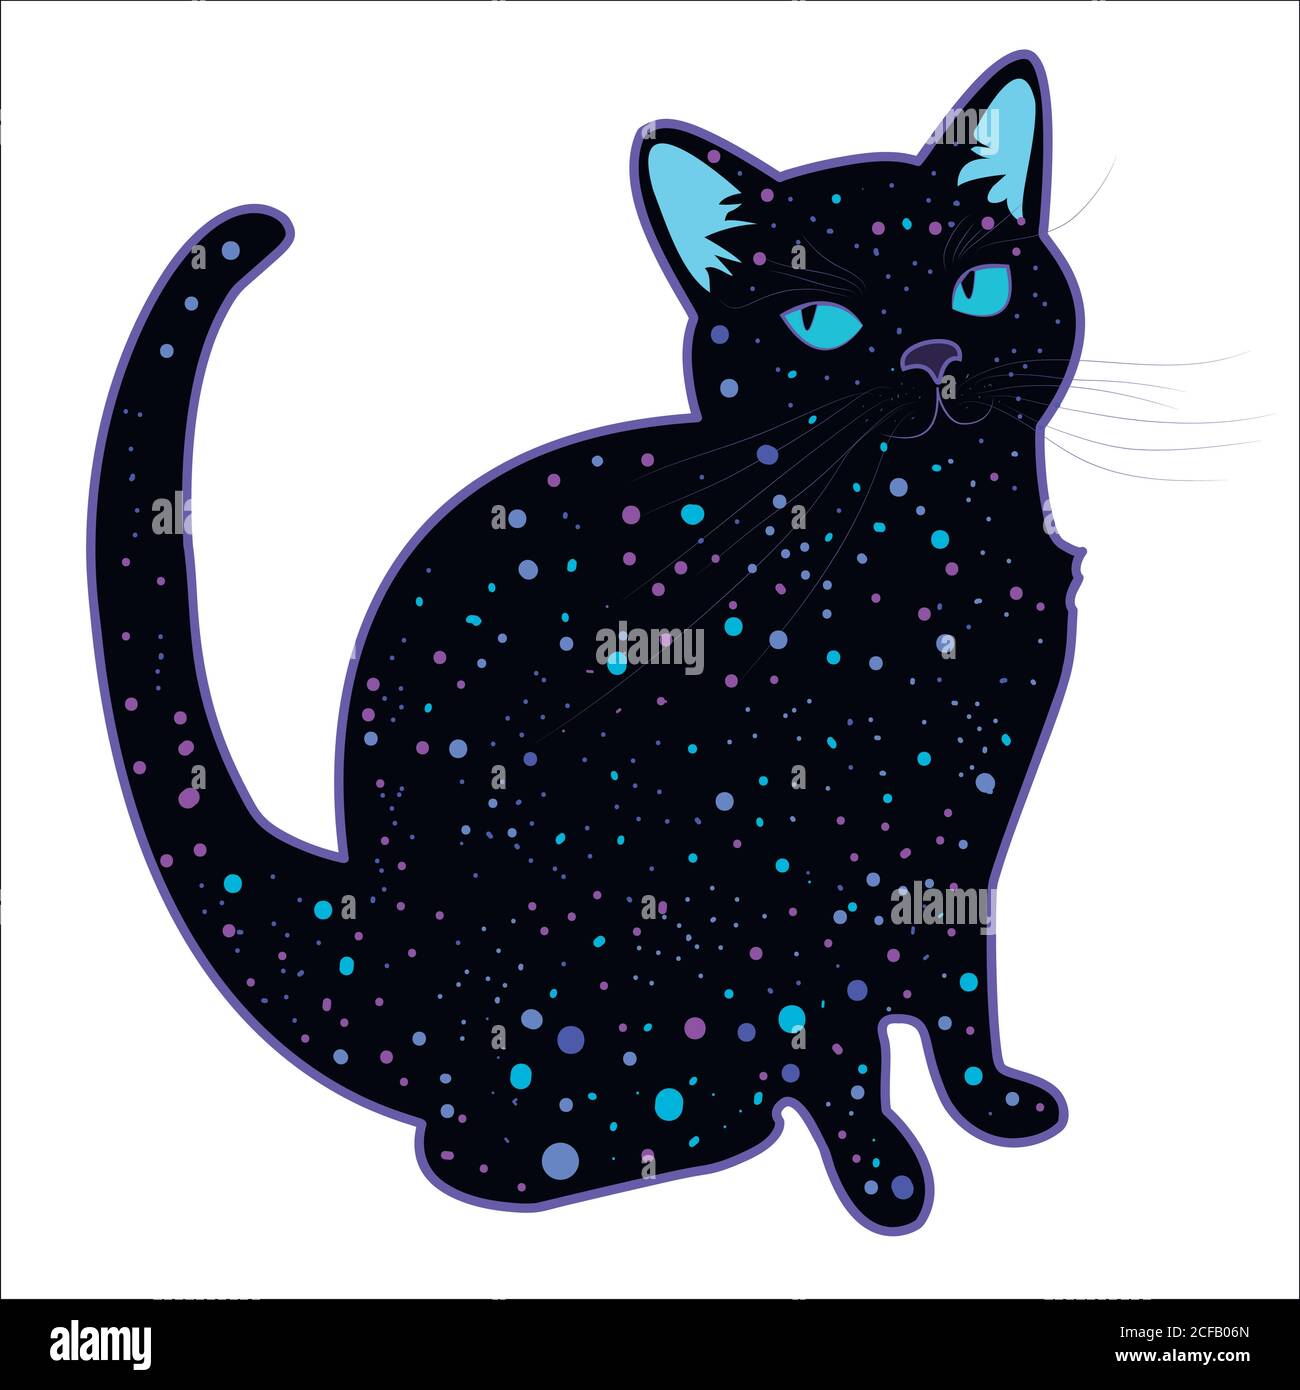 Cute funny cosmic psychedelic silhouette cat isolated on white background. Design bright colorful charming surreal cat, star on the body. Stock Vector